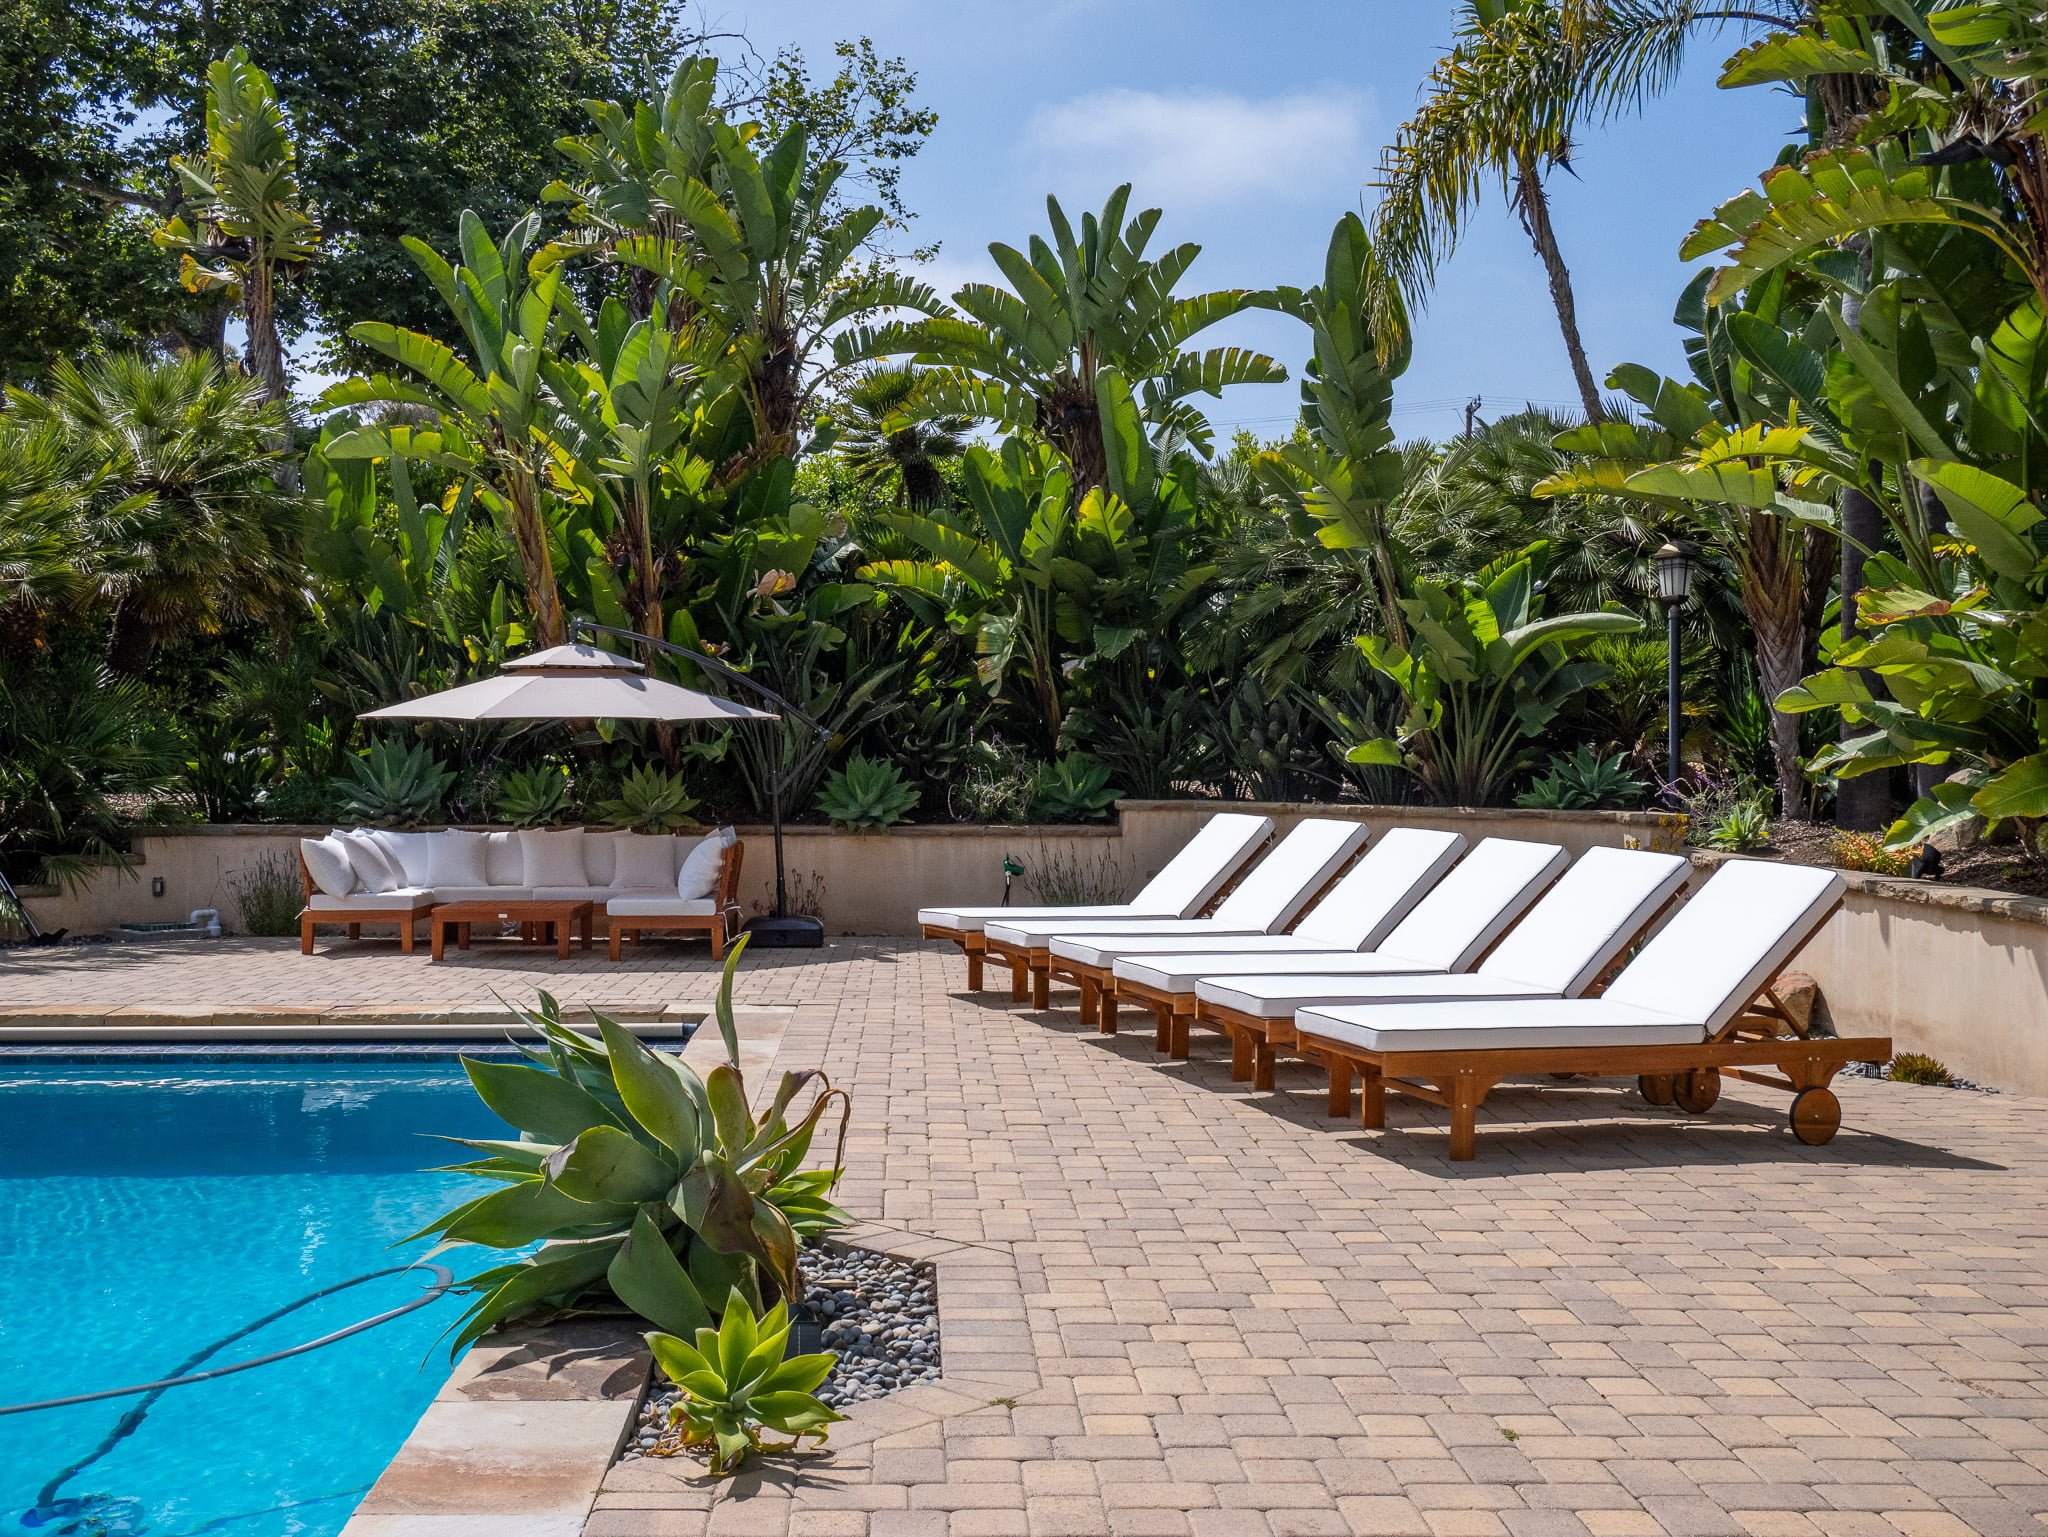 Luxury hotel poolside area with lounge chairs captured by professional drone photography for enhanced marketing and virtual tours